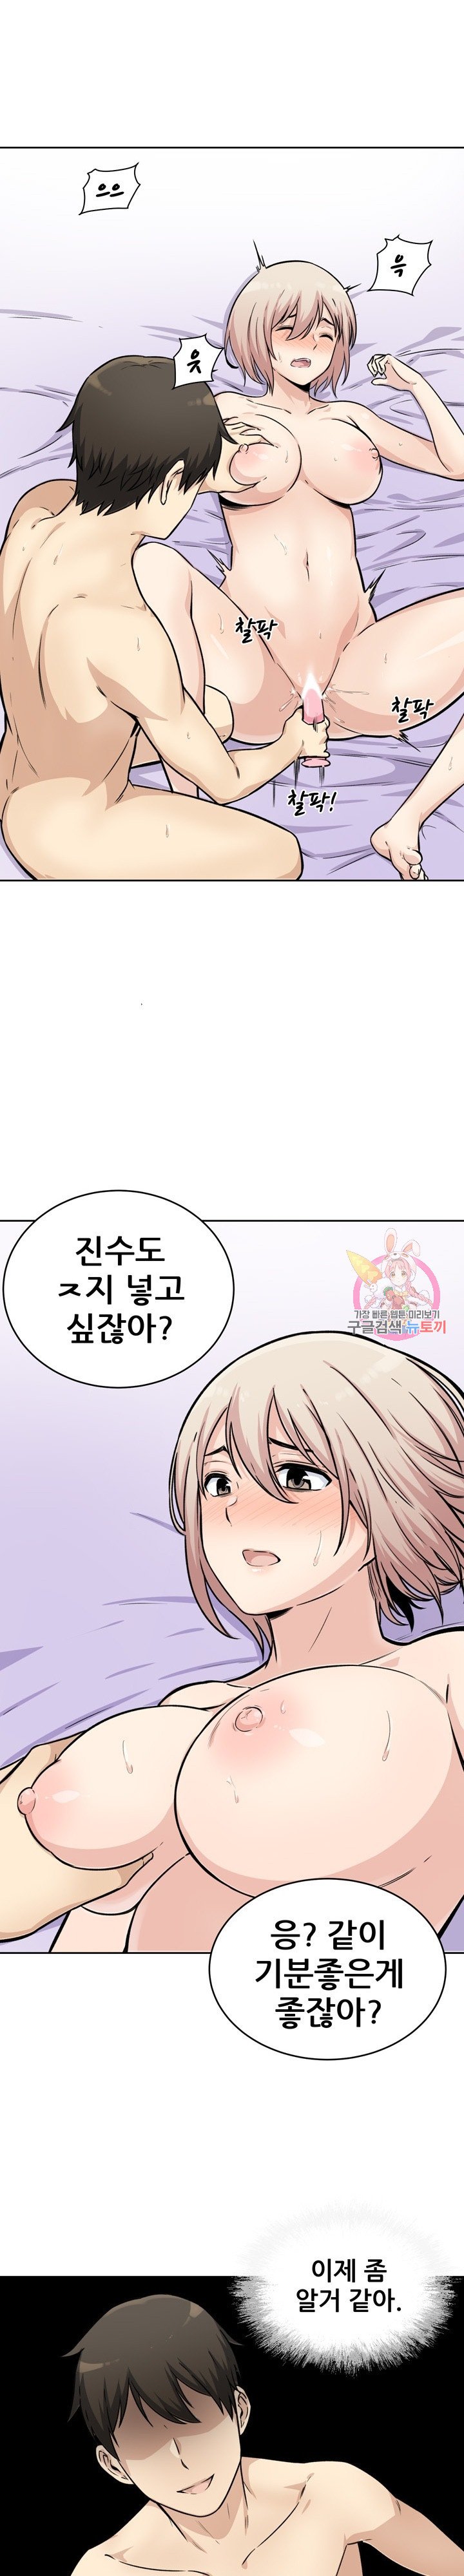 the-ark-is-me-raw-chap-34-20